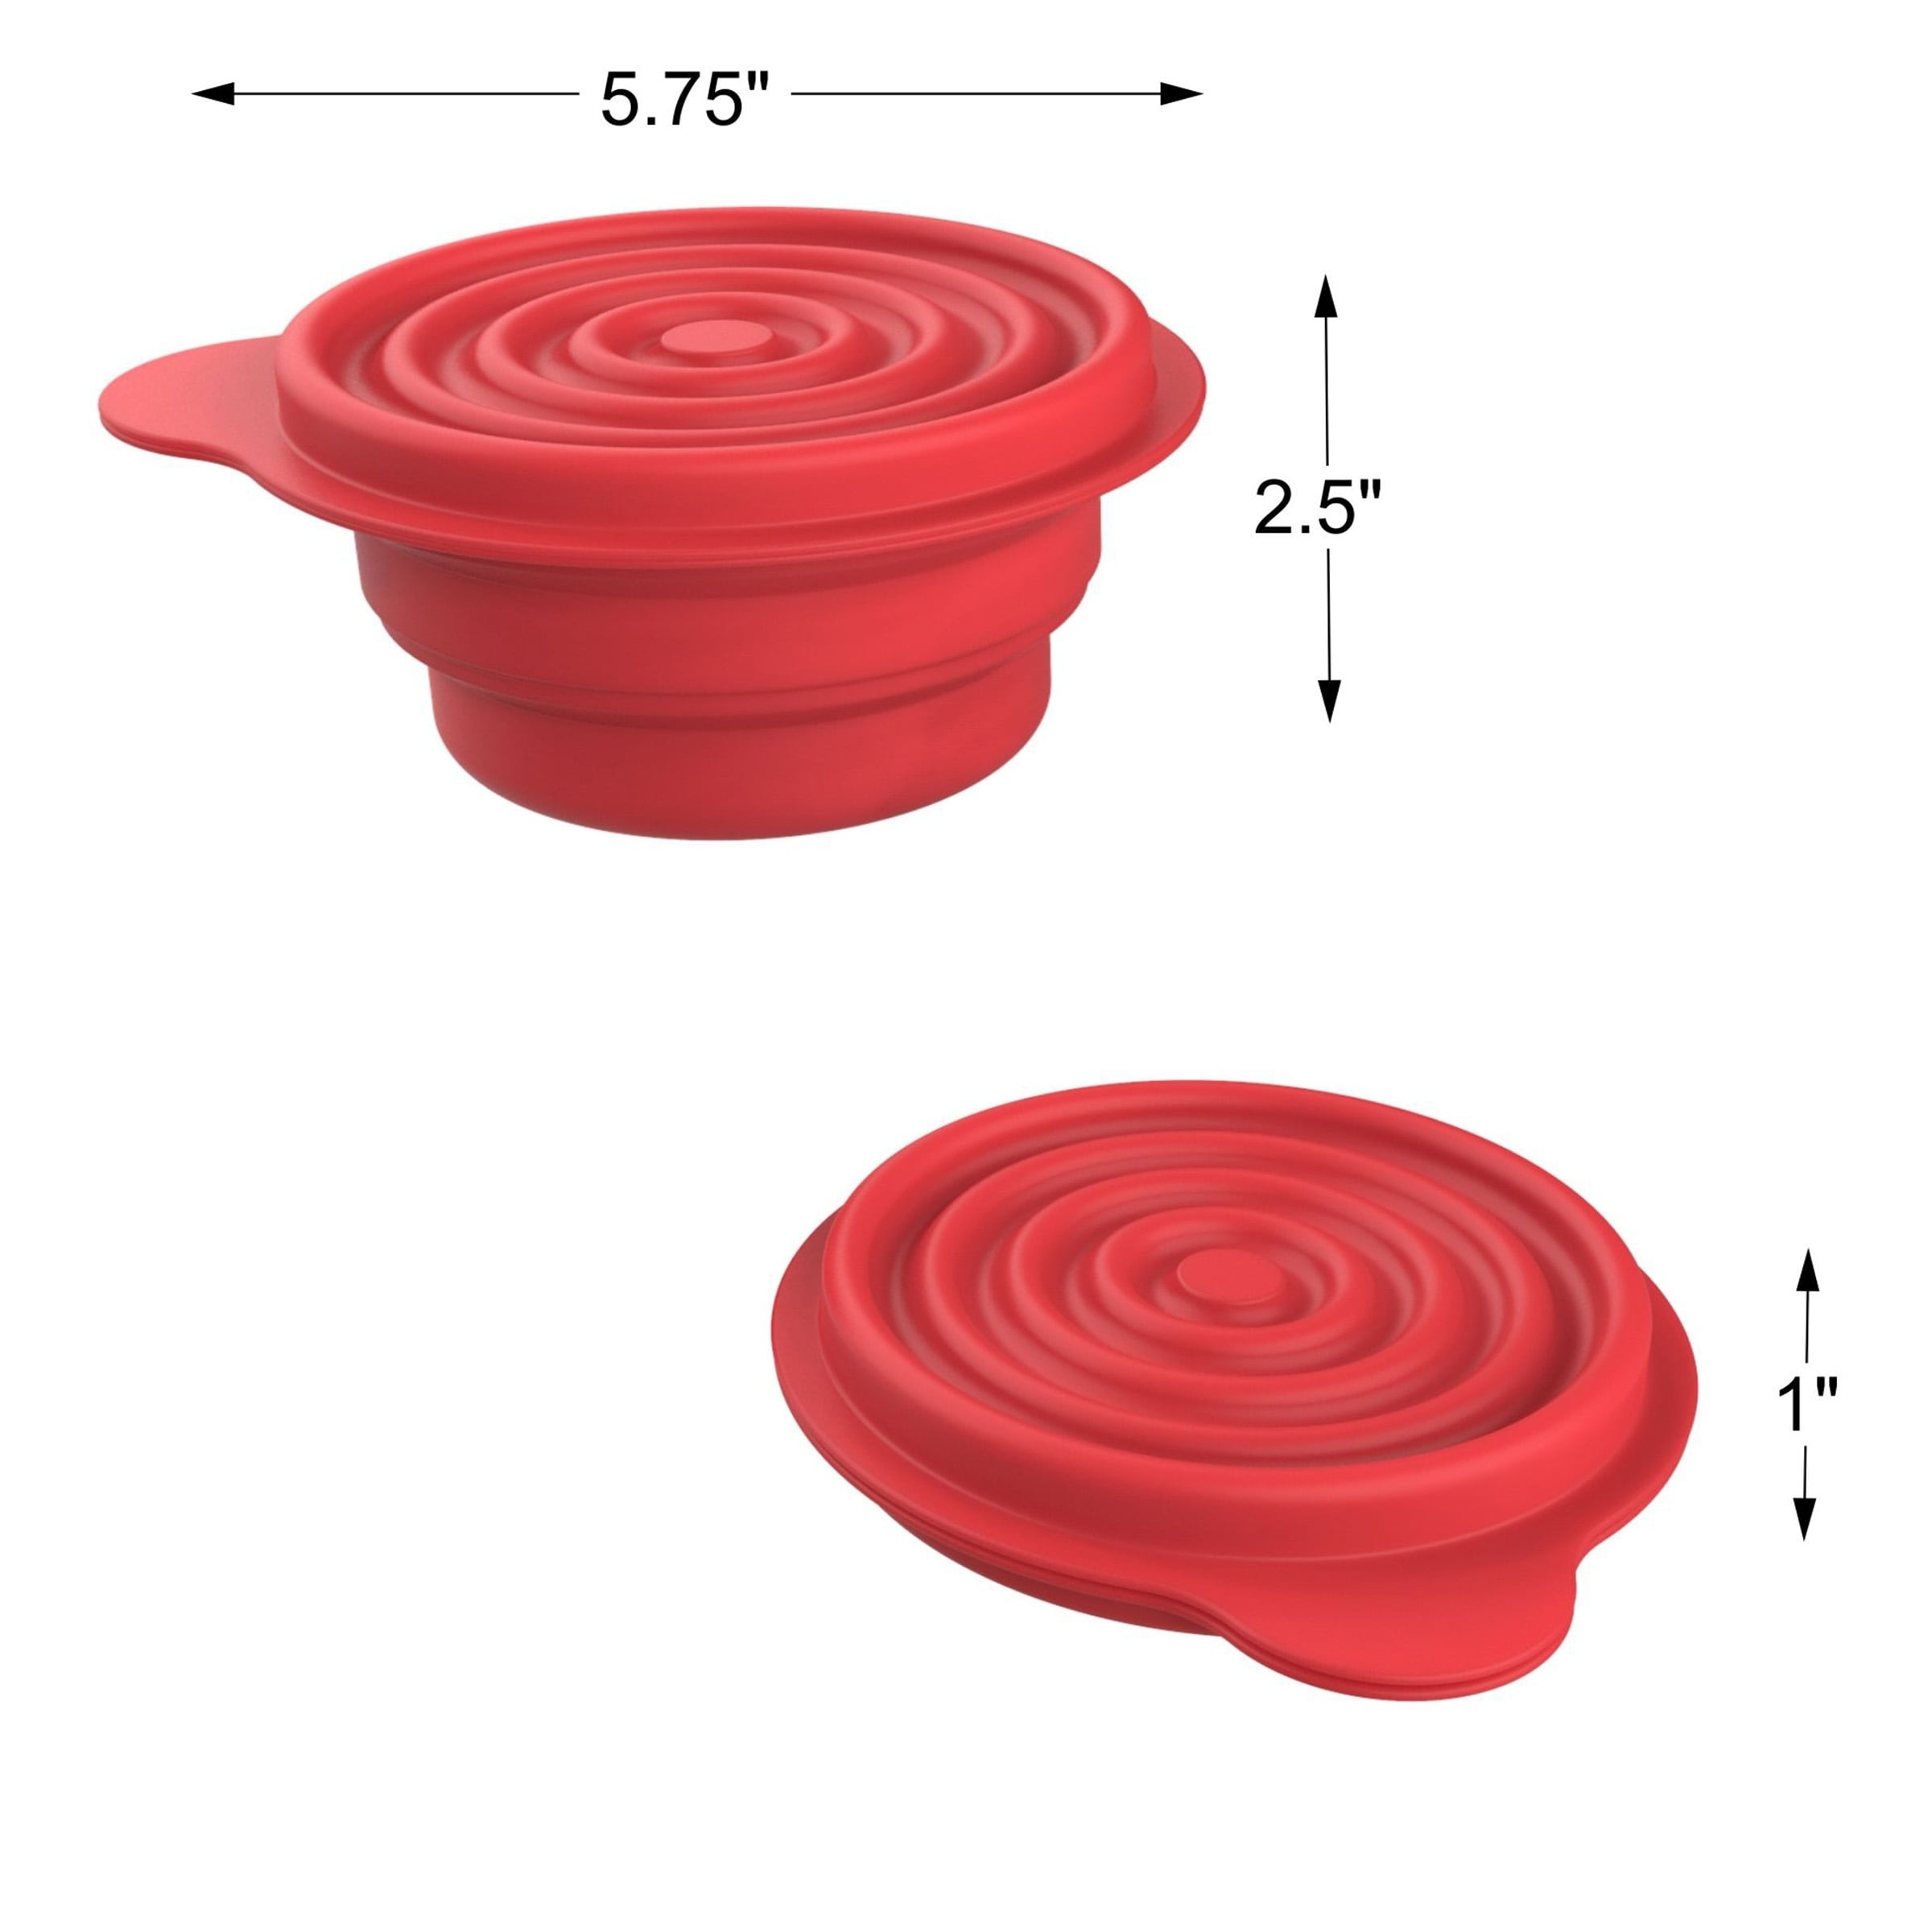 https://ak1.ostkcdn.com/images/products/24299676/Collapsible-Bowls-with-Lids-BPA-Free-Silicone-by-Wakeman-Outdoors-7438c906-e6df-4932-9dbf-c31f777e002d.jpg